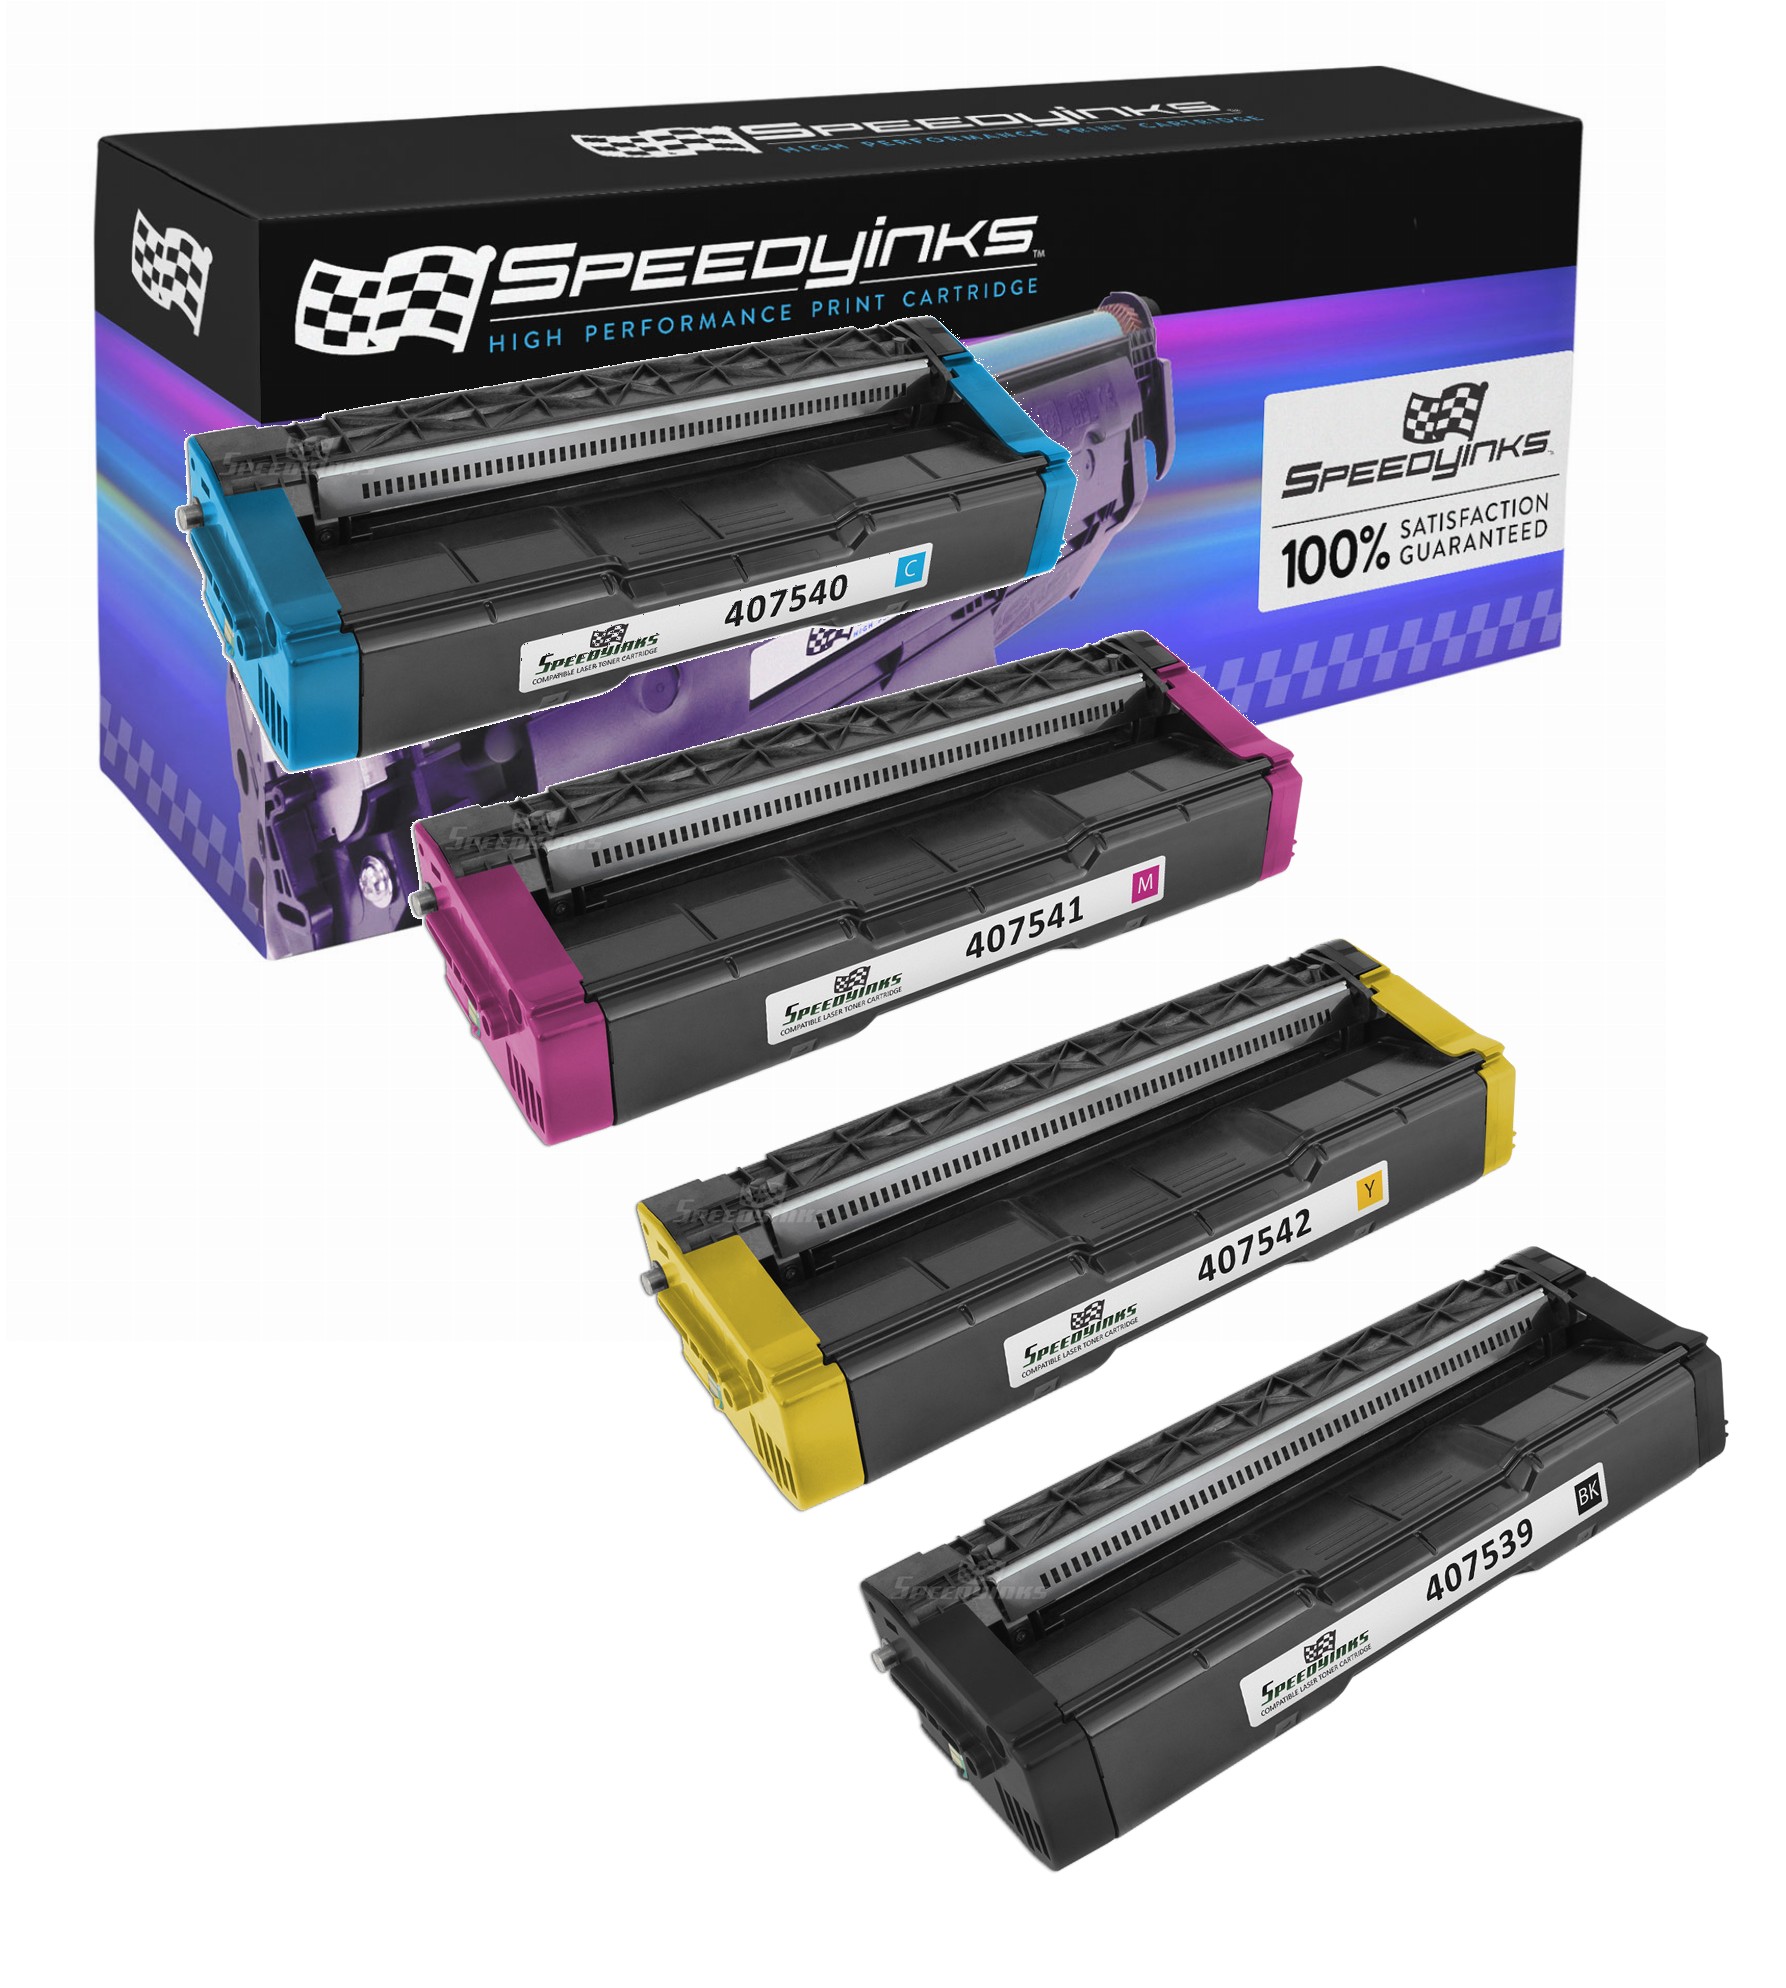 SpeedyInks - Compatible Ricoh SP C250A Toner Set 407539, 407540, 407541, 407542 for use in SP C250DN, SP C250SF - image 1 of 4